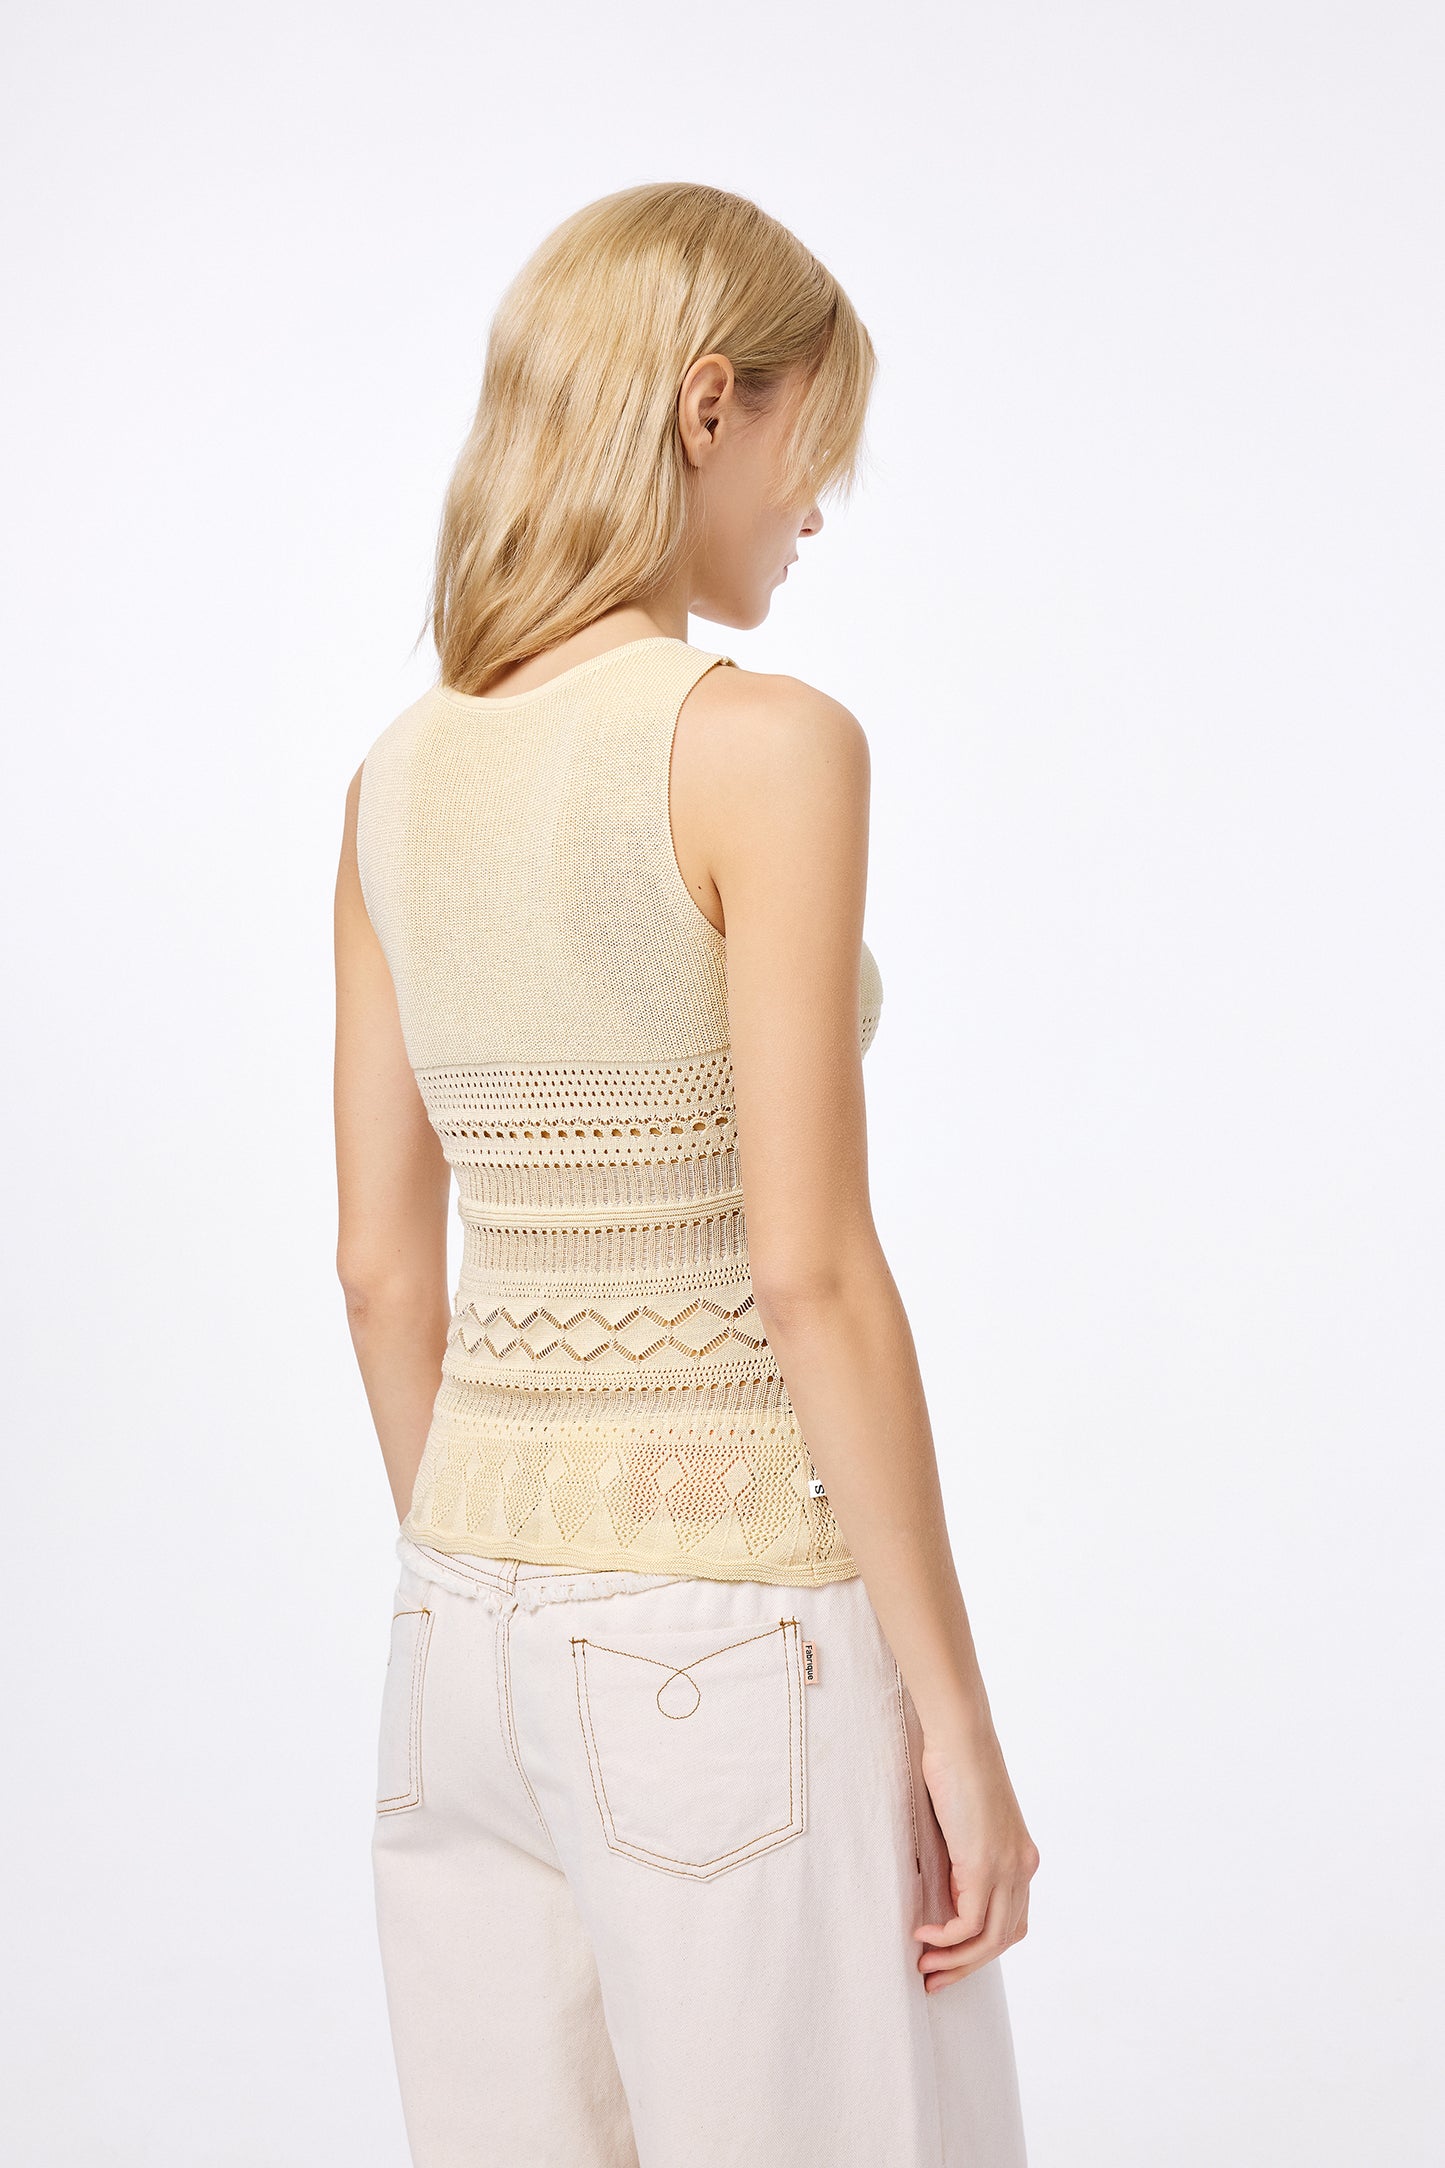 Alva Handcrafted Lace Crochet Top in Cotton Viscose Knit